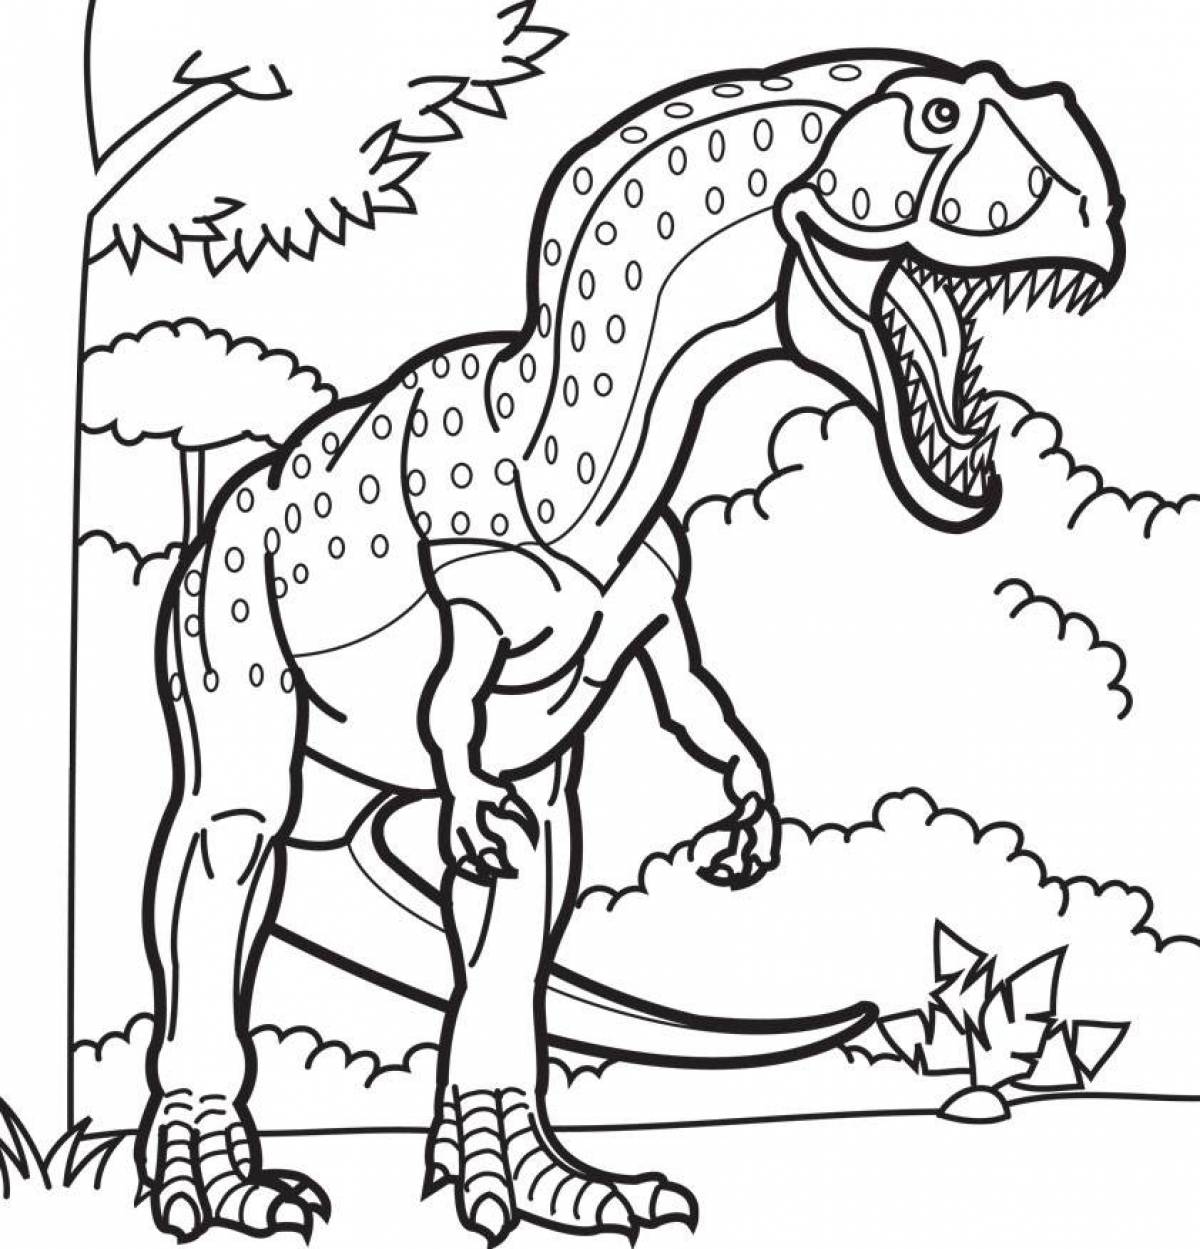 Amazing dinosaurs coloring book for kids 5-6 years old